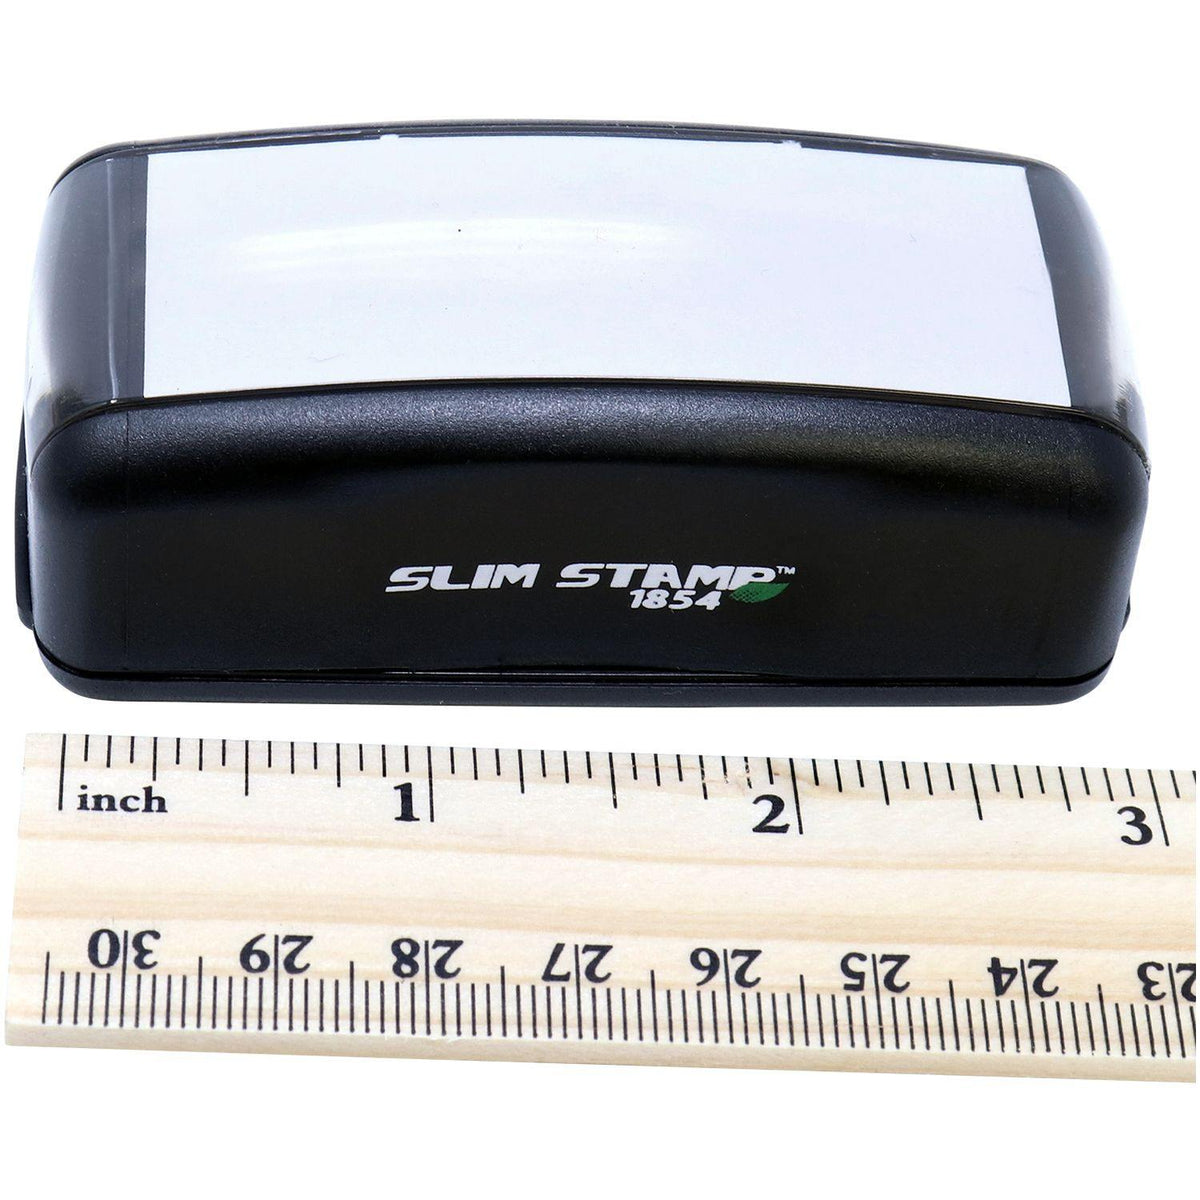 Measurement Large Pre-Inked Pagado Stamp with Ruler